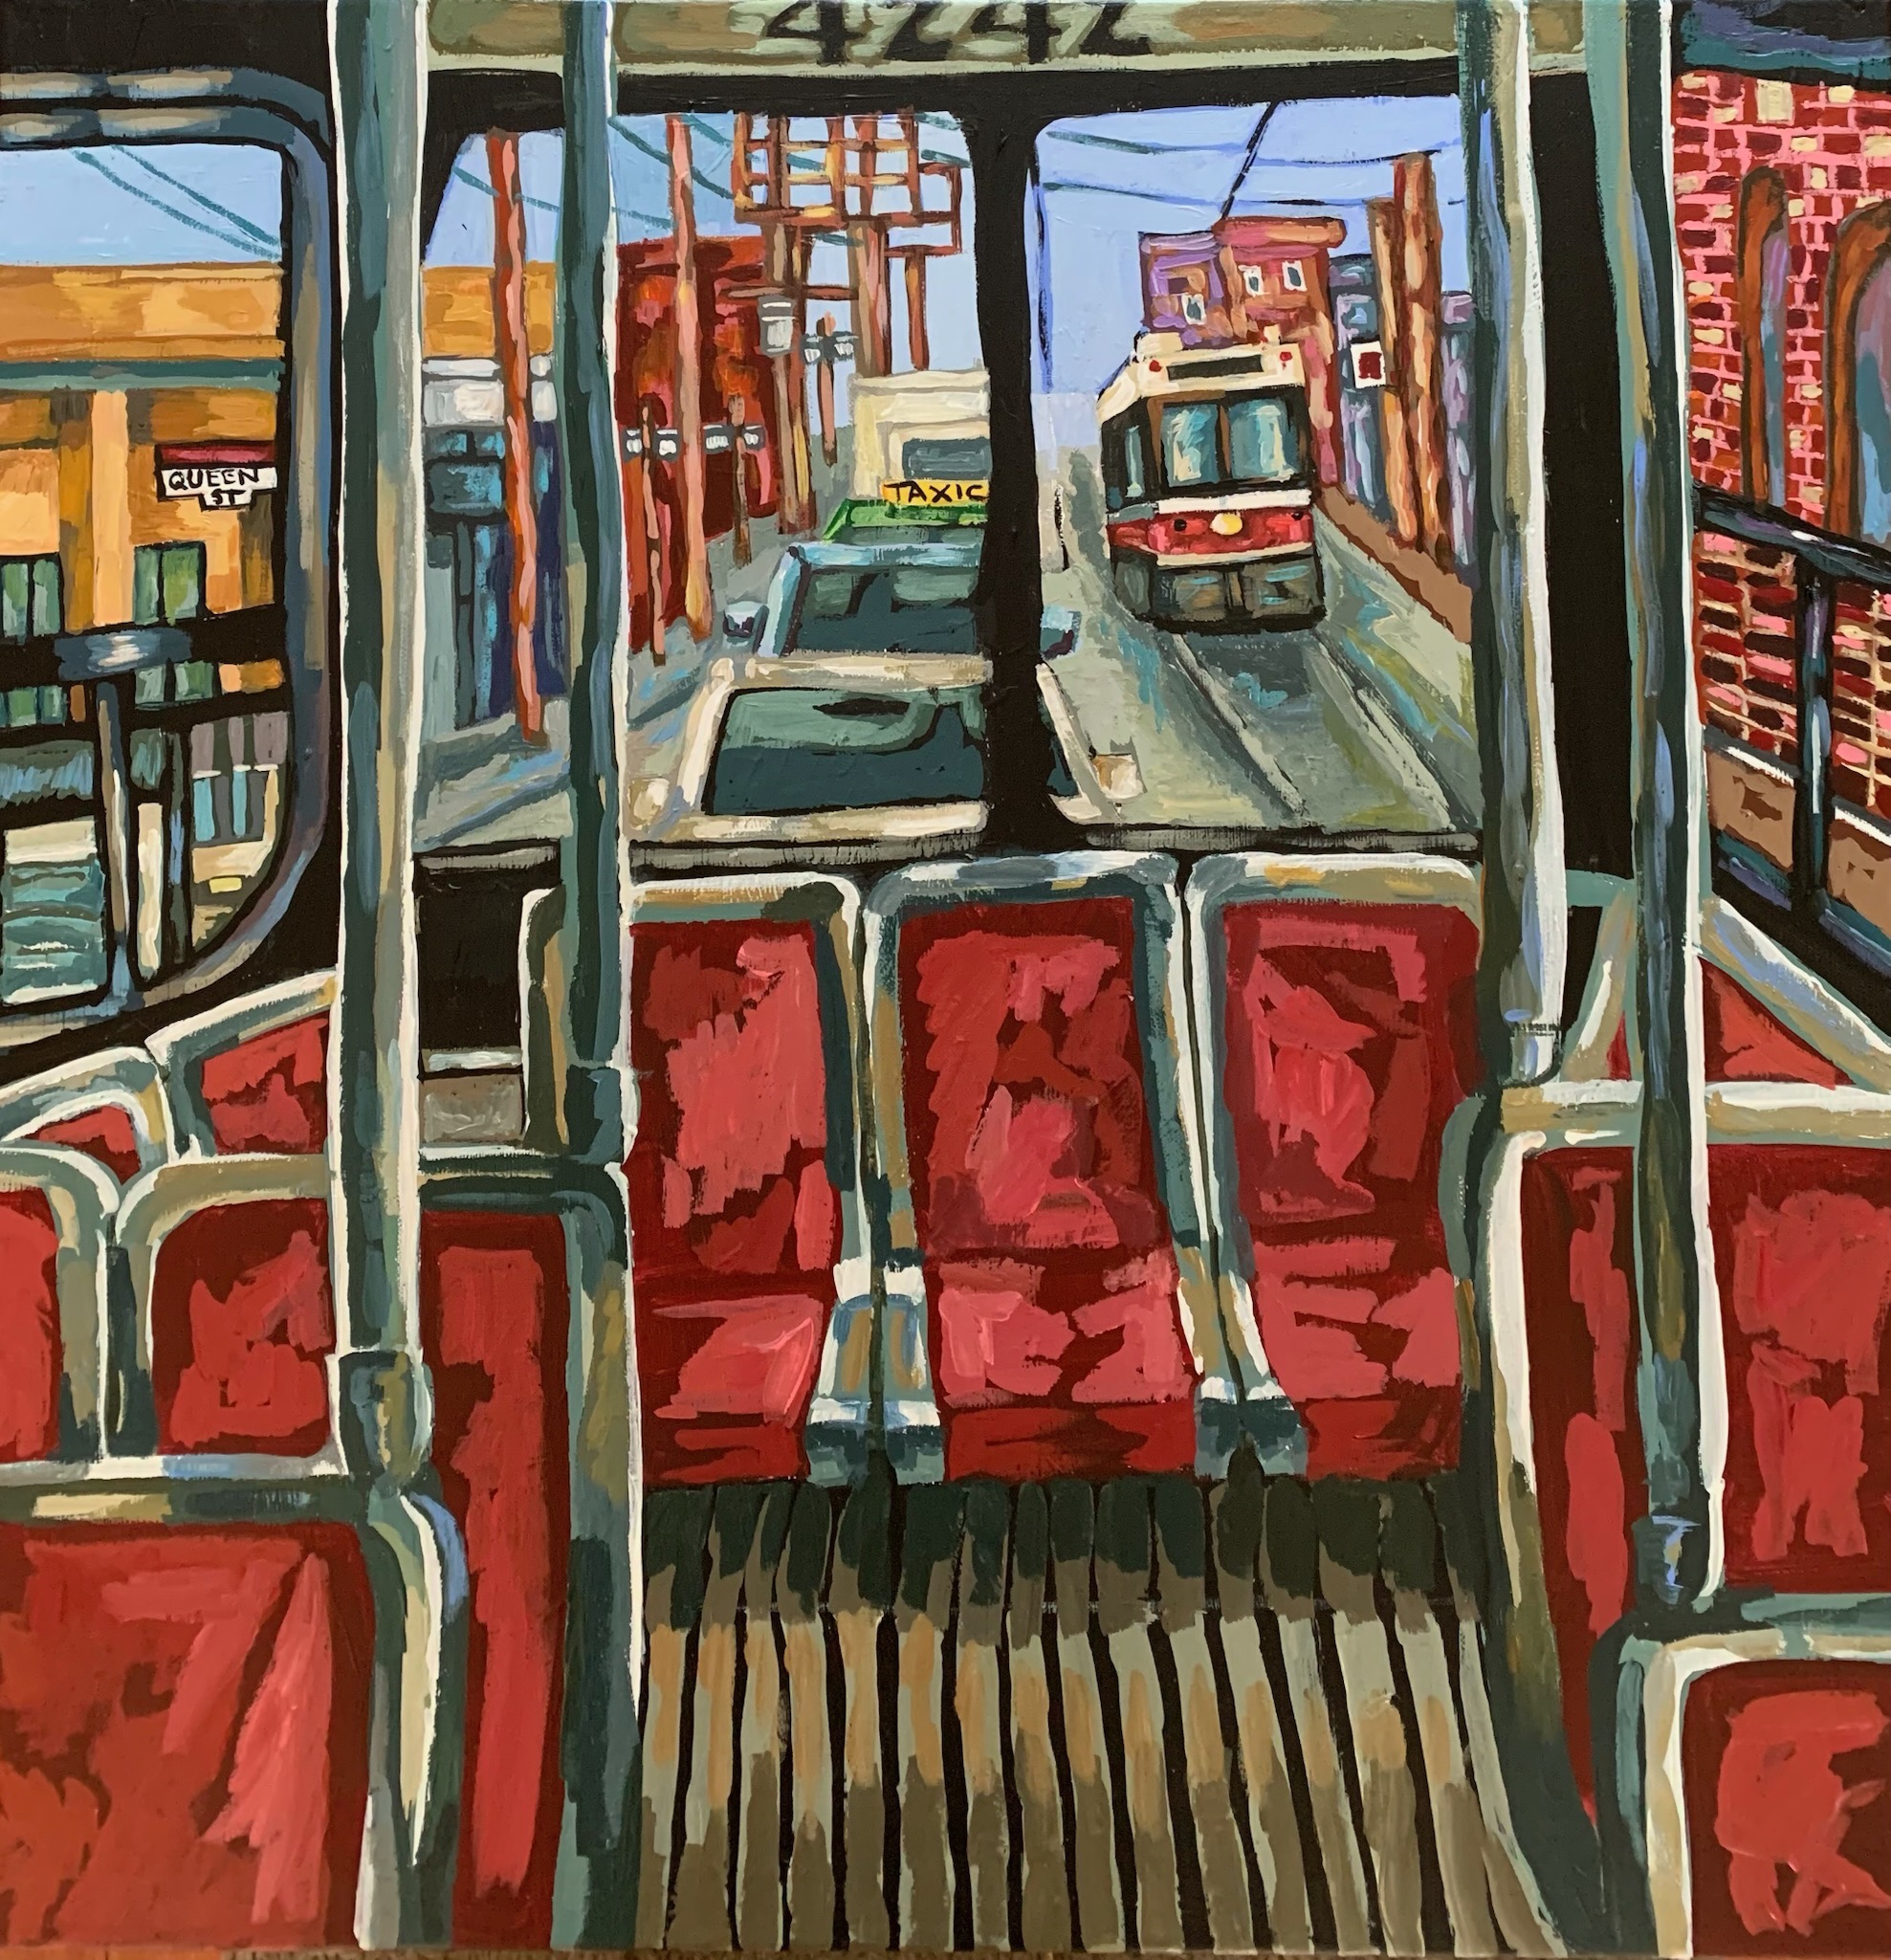 Painting of a streetcar in traffic as seen through the back window of another streetcar